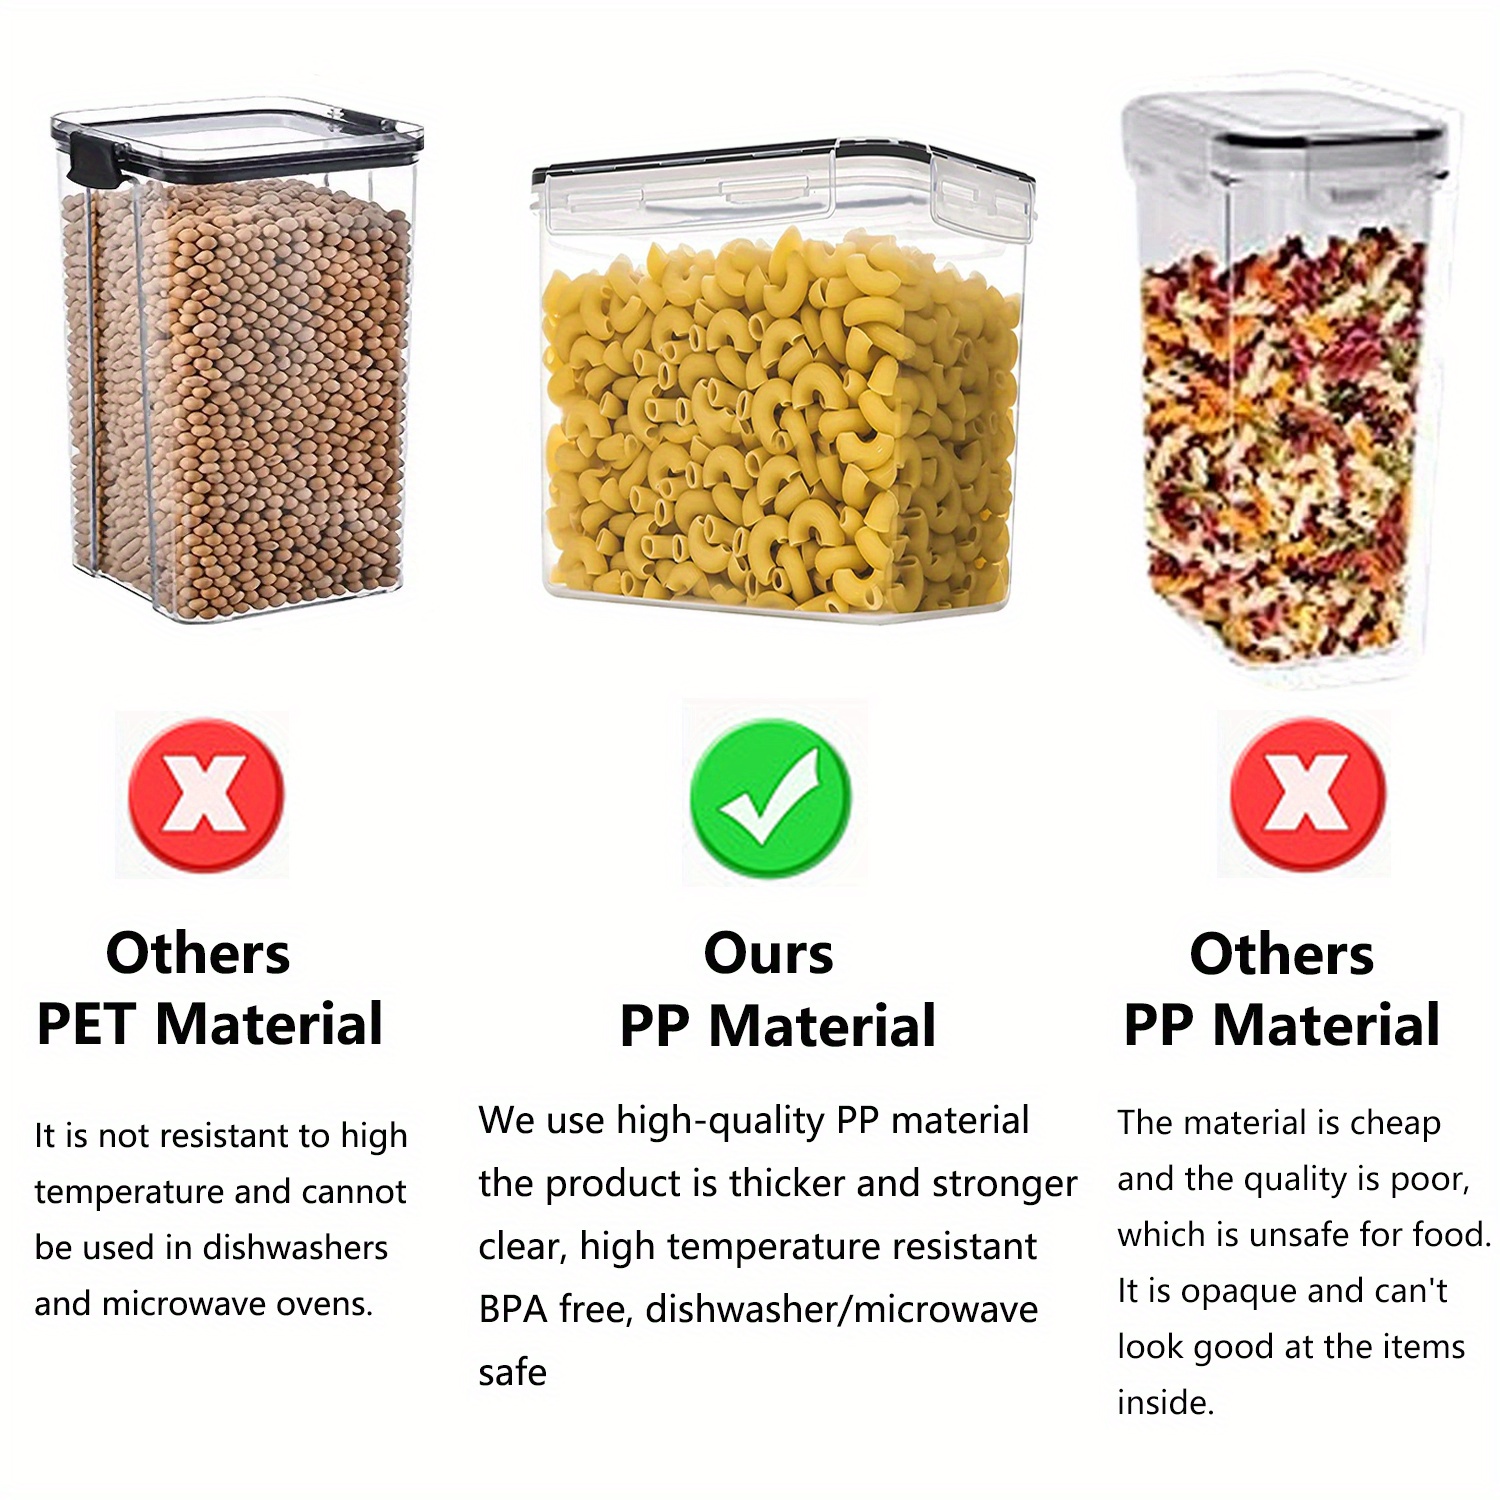 Bulk Food Storage Containers for Large Quantities of Flour, Oil, Sugar,  Beans, and Cans